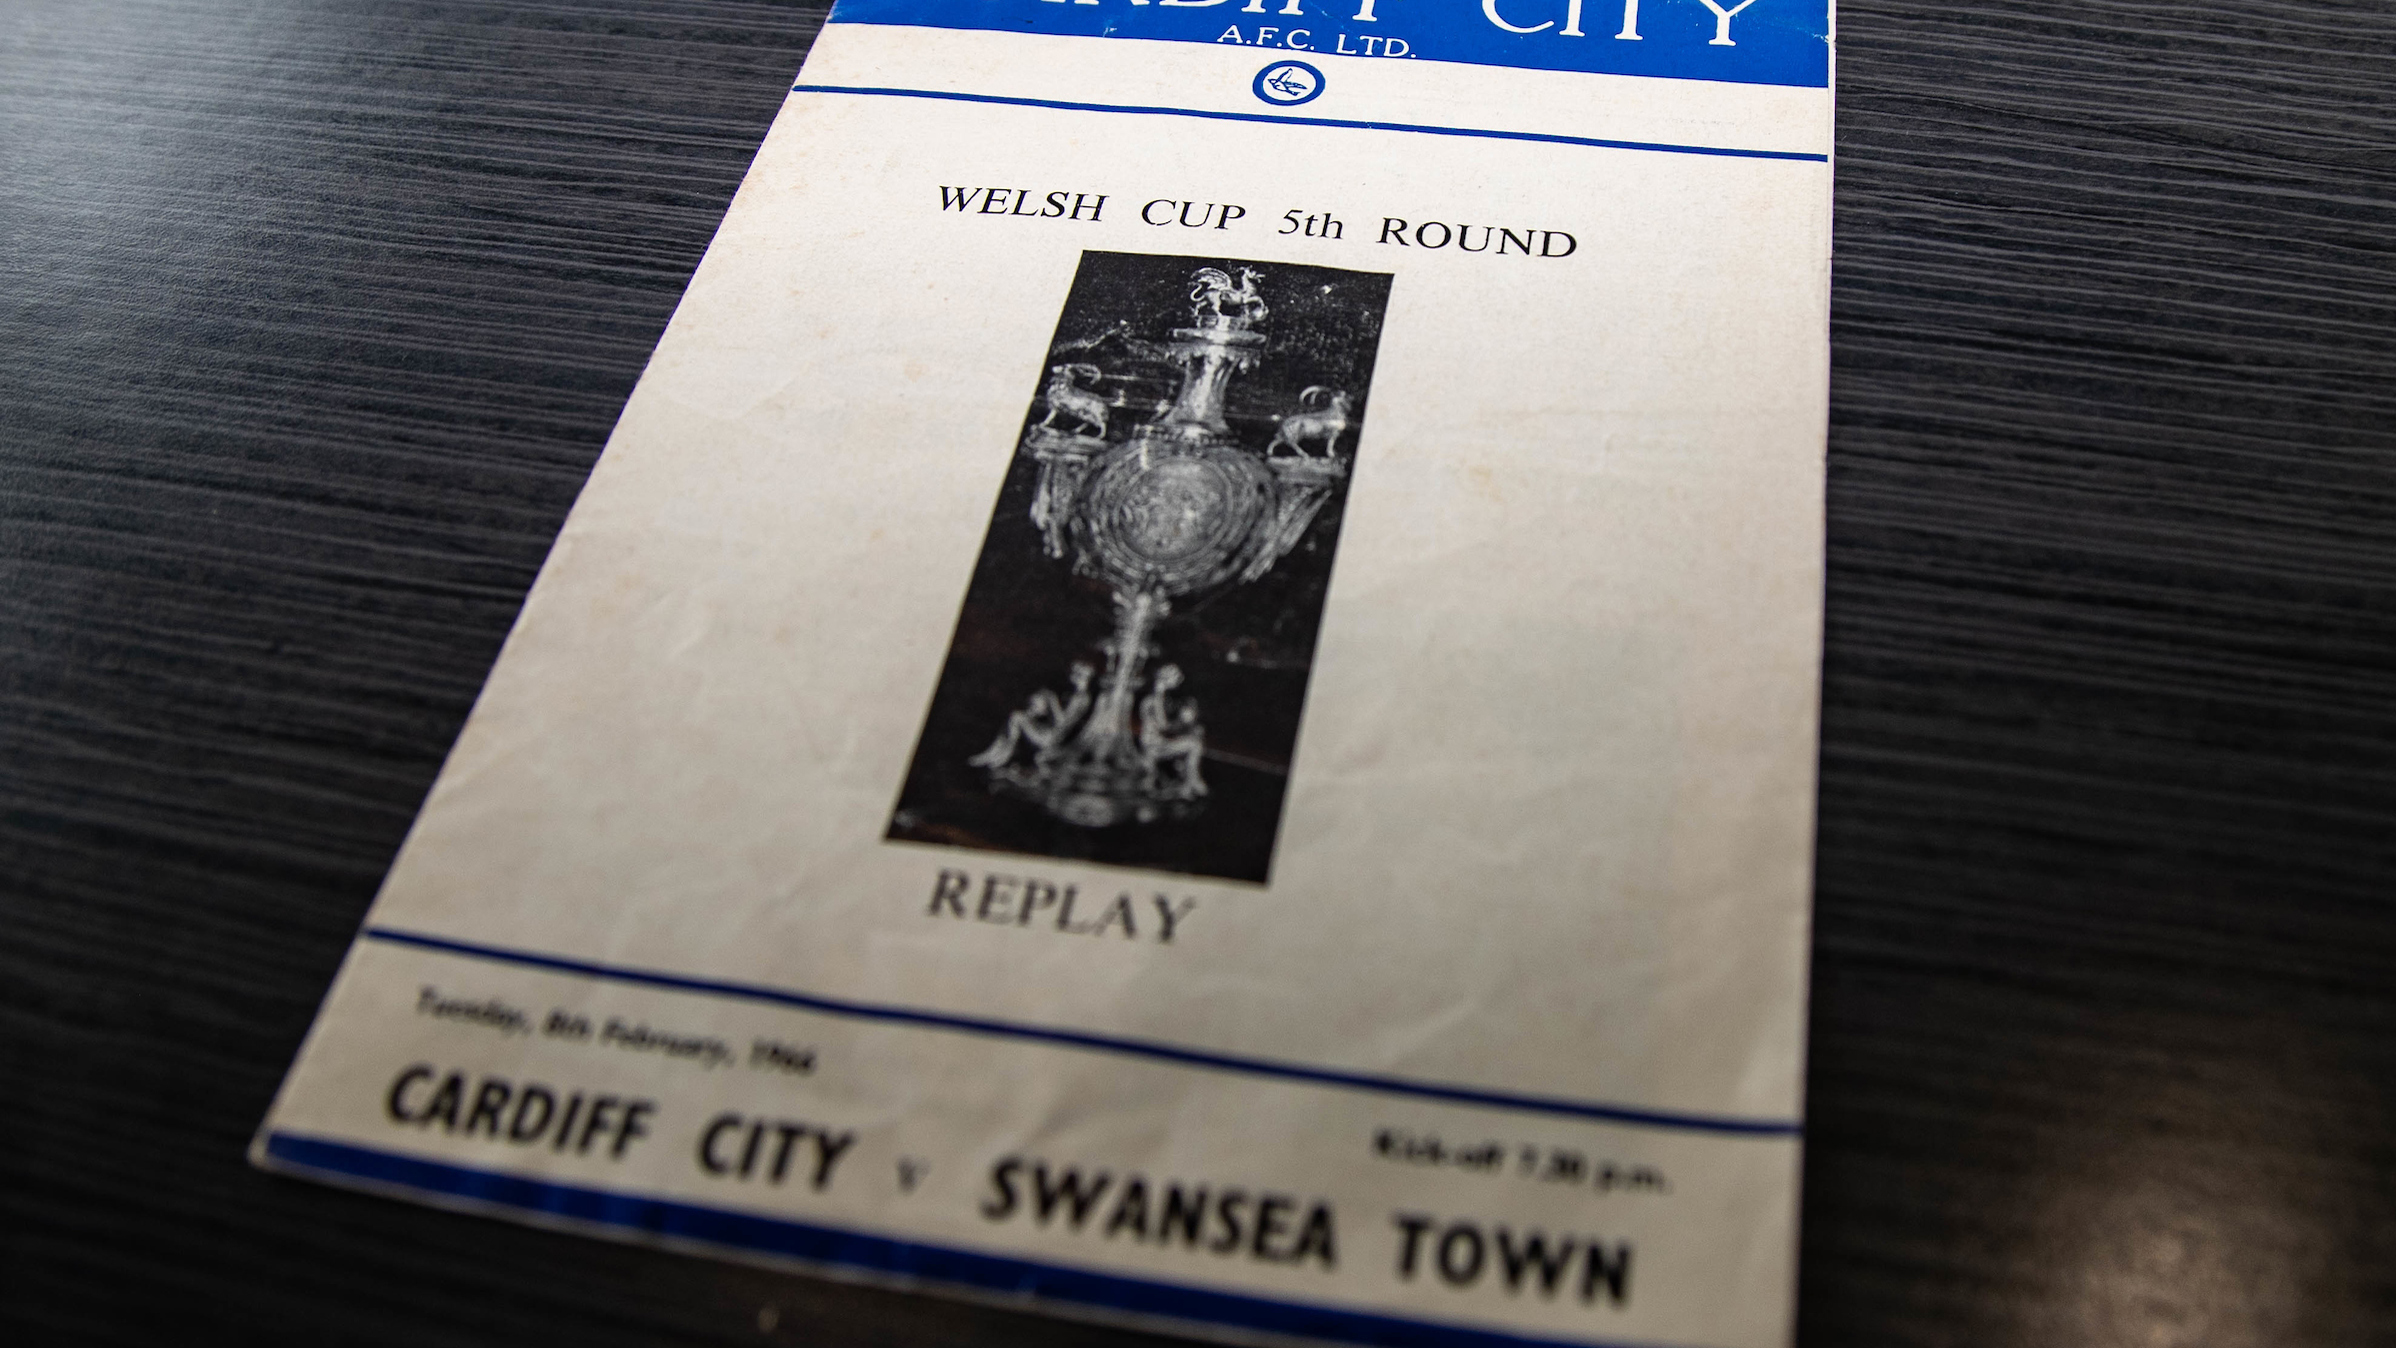 1966 Welsh Cup replay programme